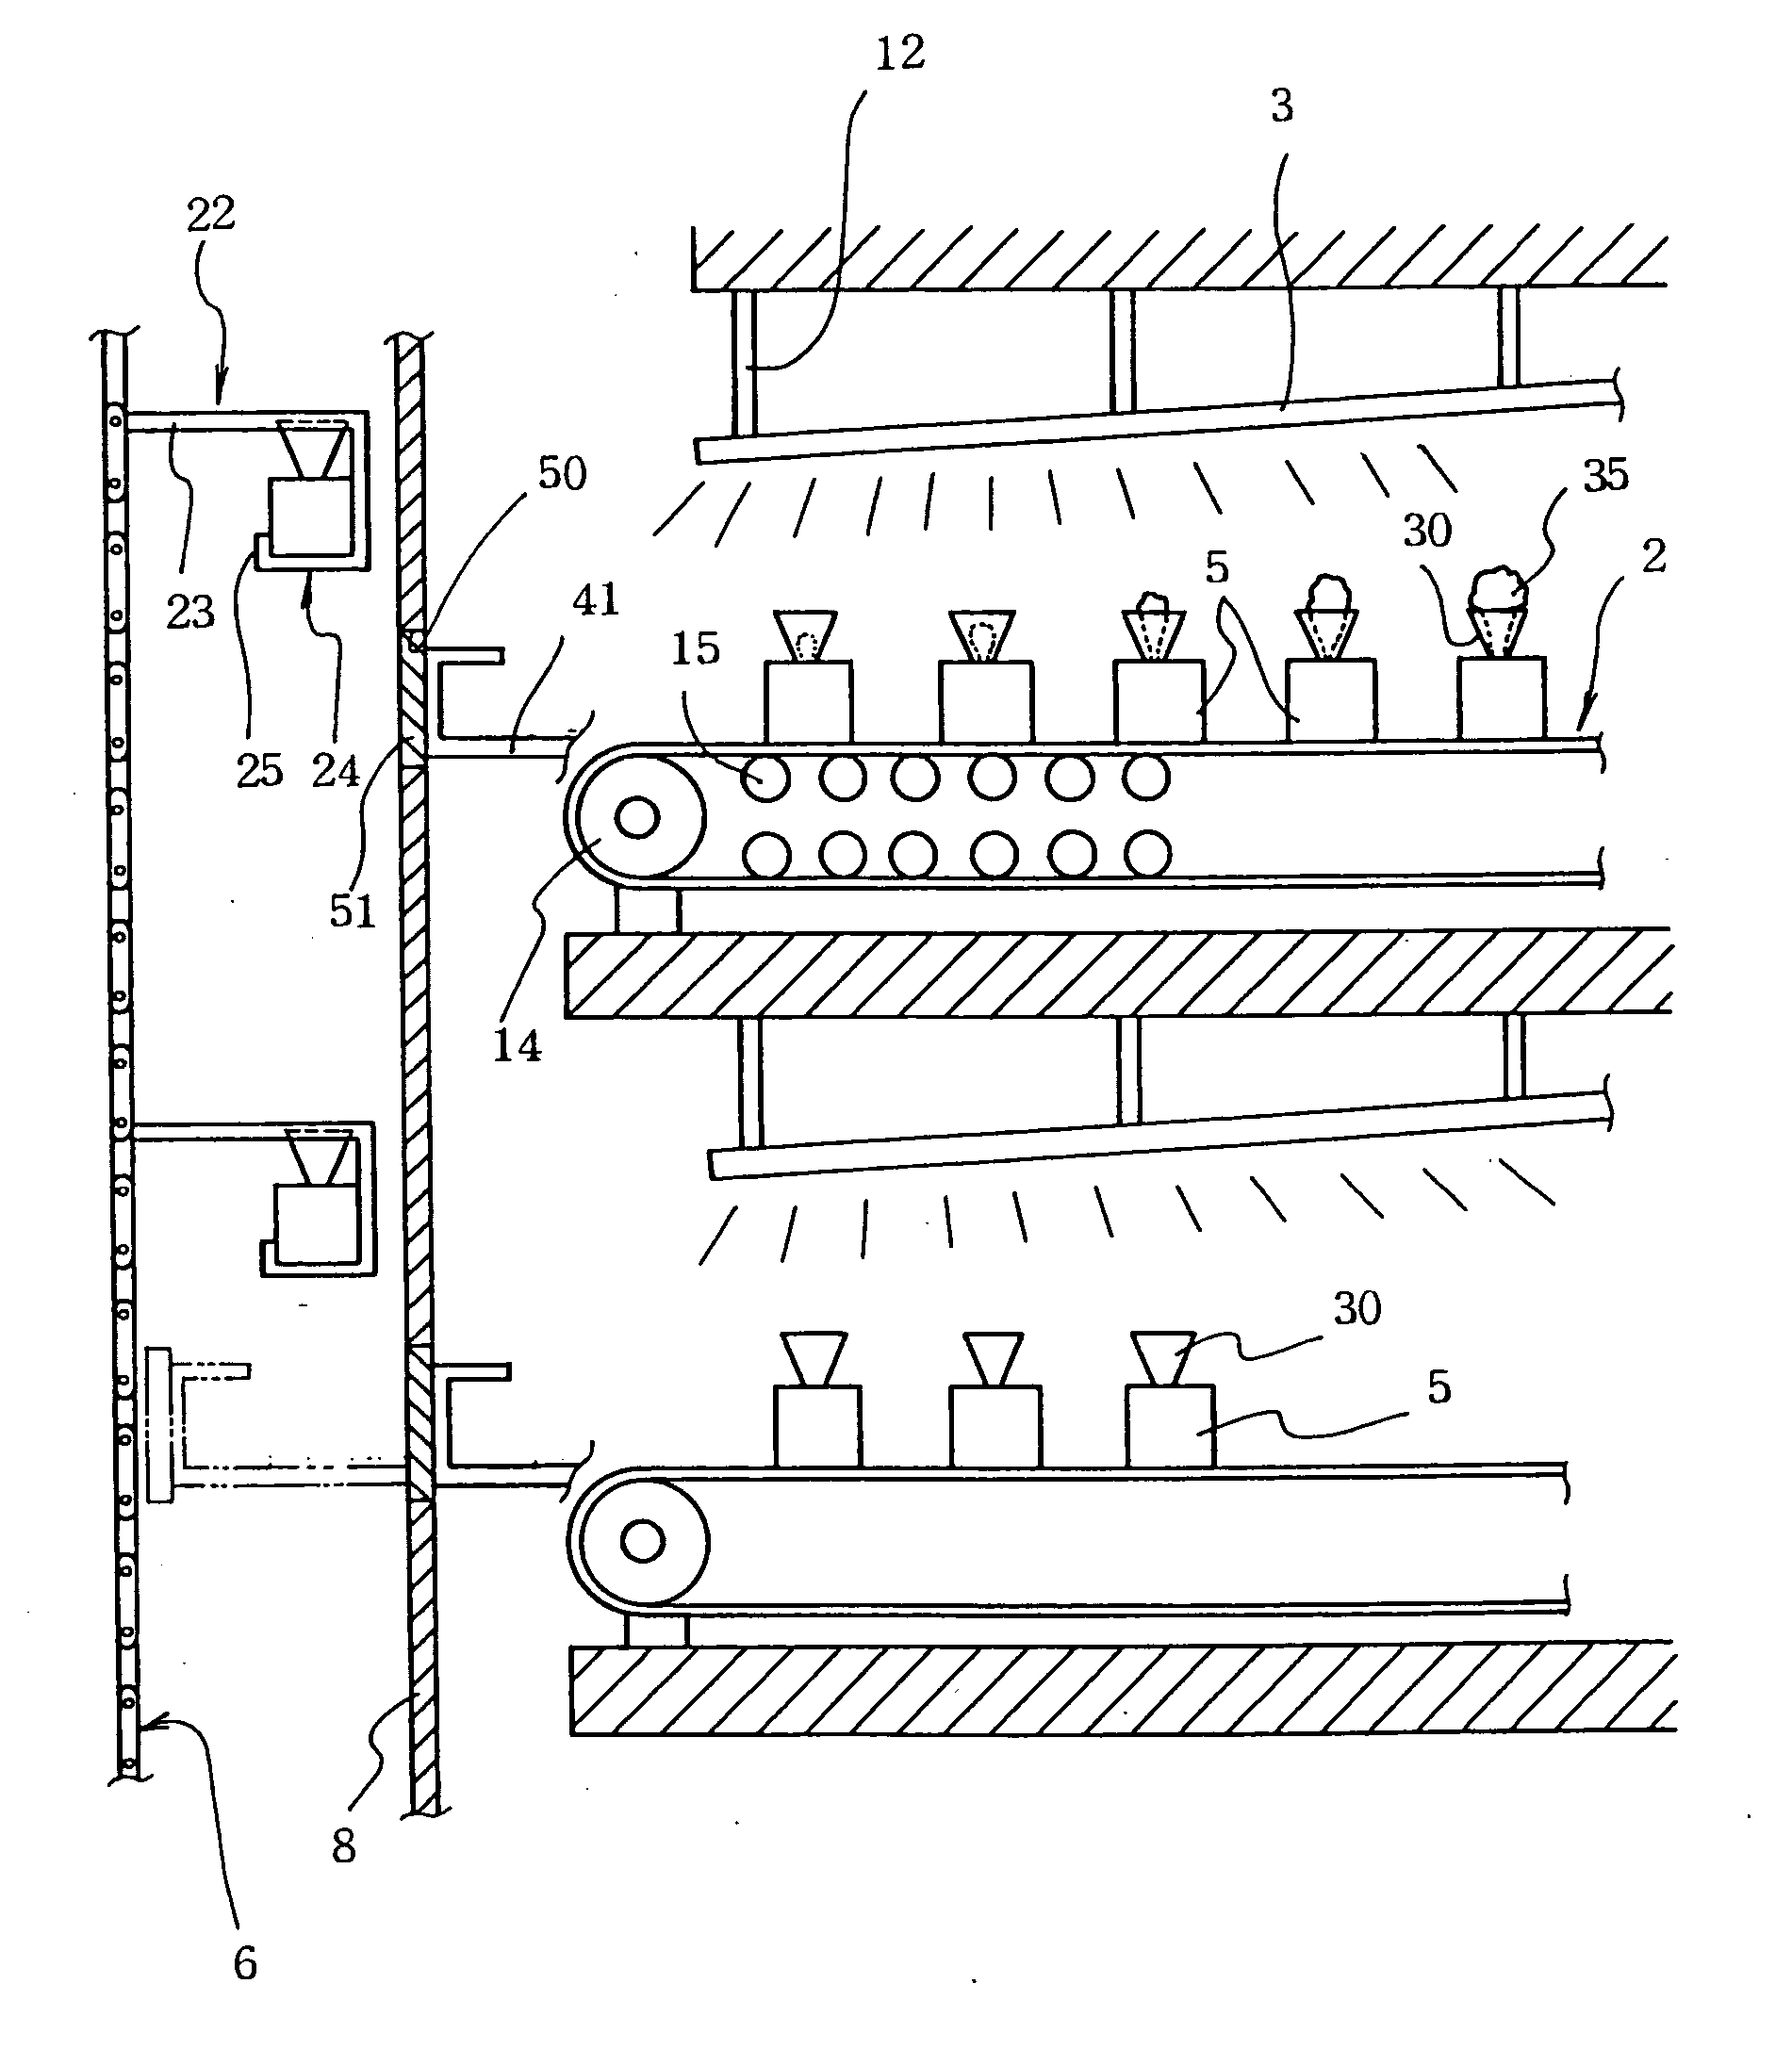 Method of producing plants, plant cultivating device, and light-emitting panel